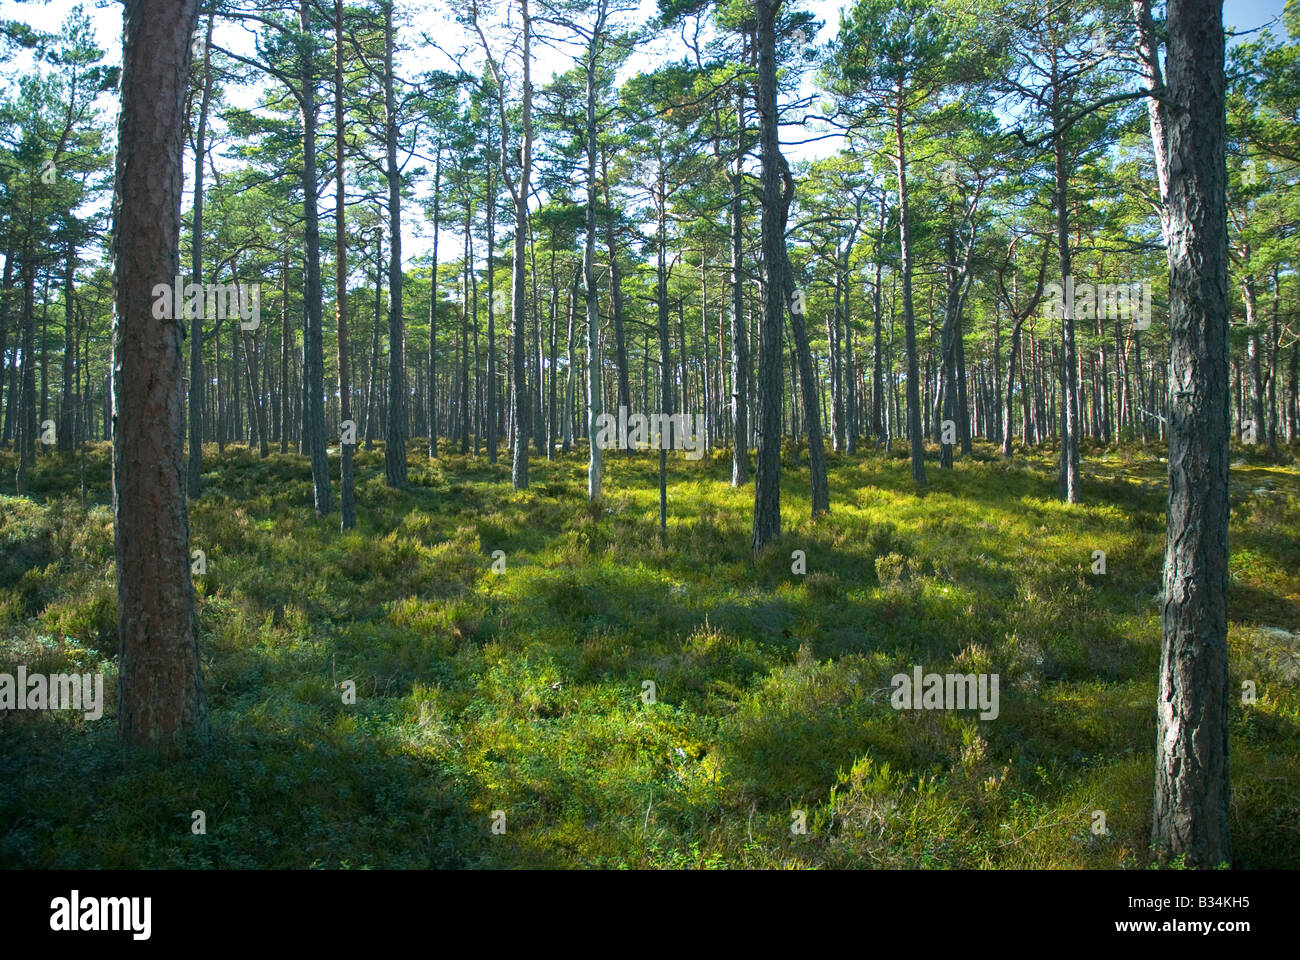 Forest mainly consisting of pine trees (Scots pine) on Sandhamn/Sandön island in the archipelago of Stockholm, Sweden. Stock Photo